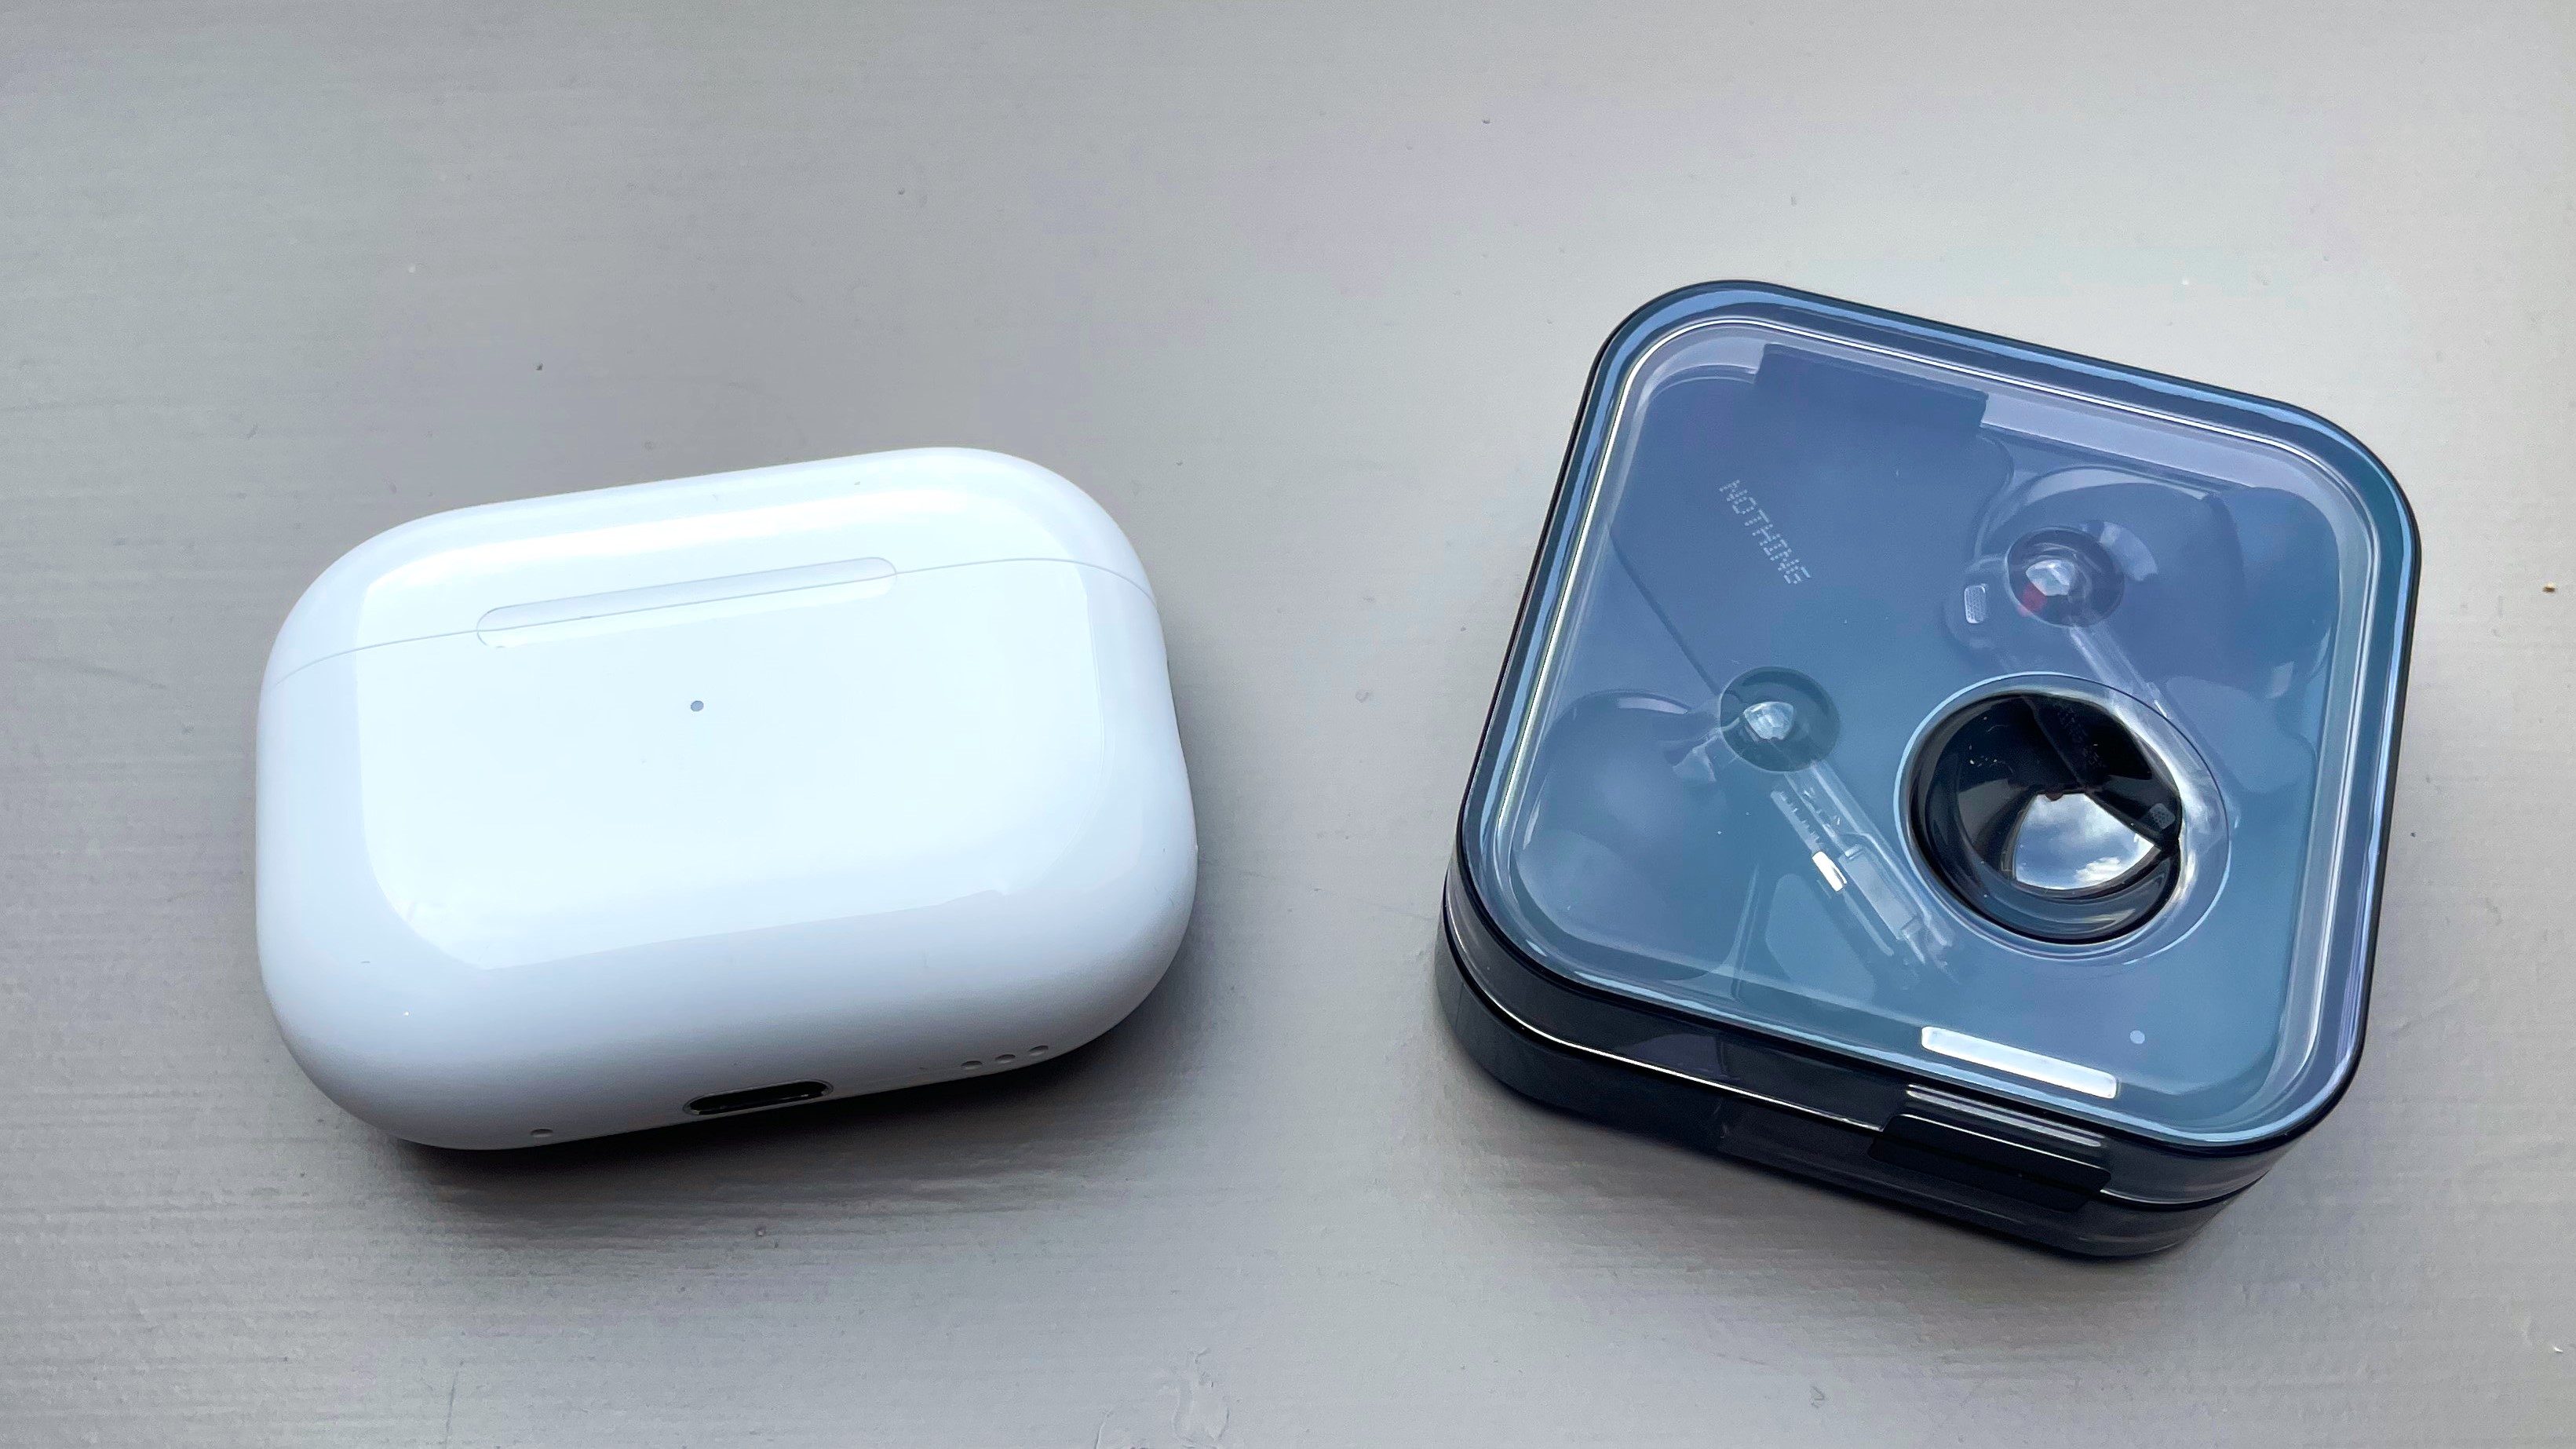 Apple AirPods Pro 2 vs Nothing Ear charging cases side by side on a gray painted surface